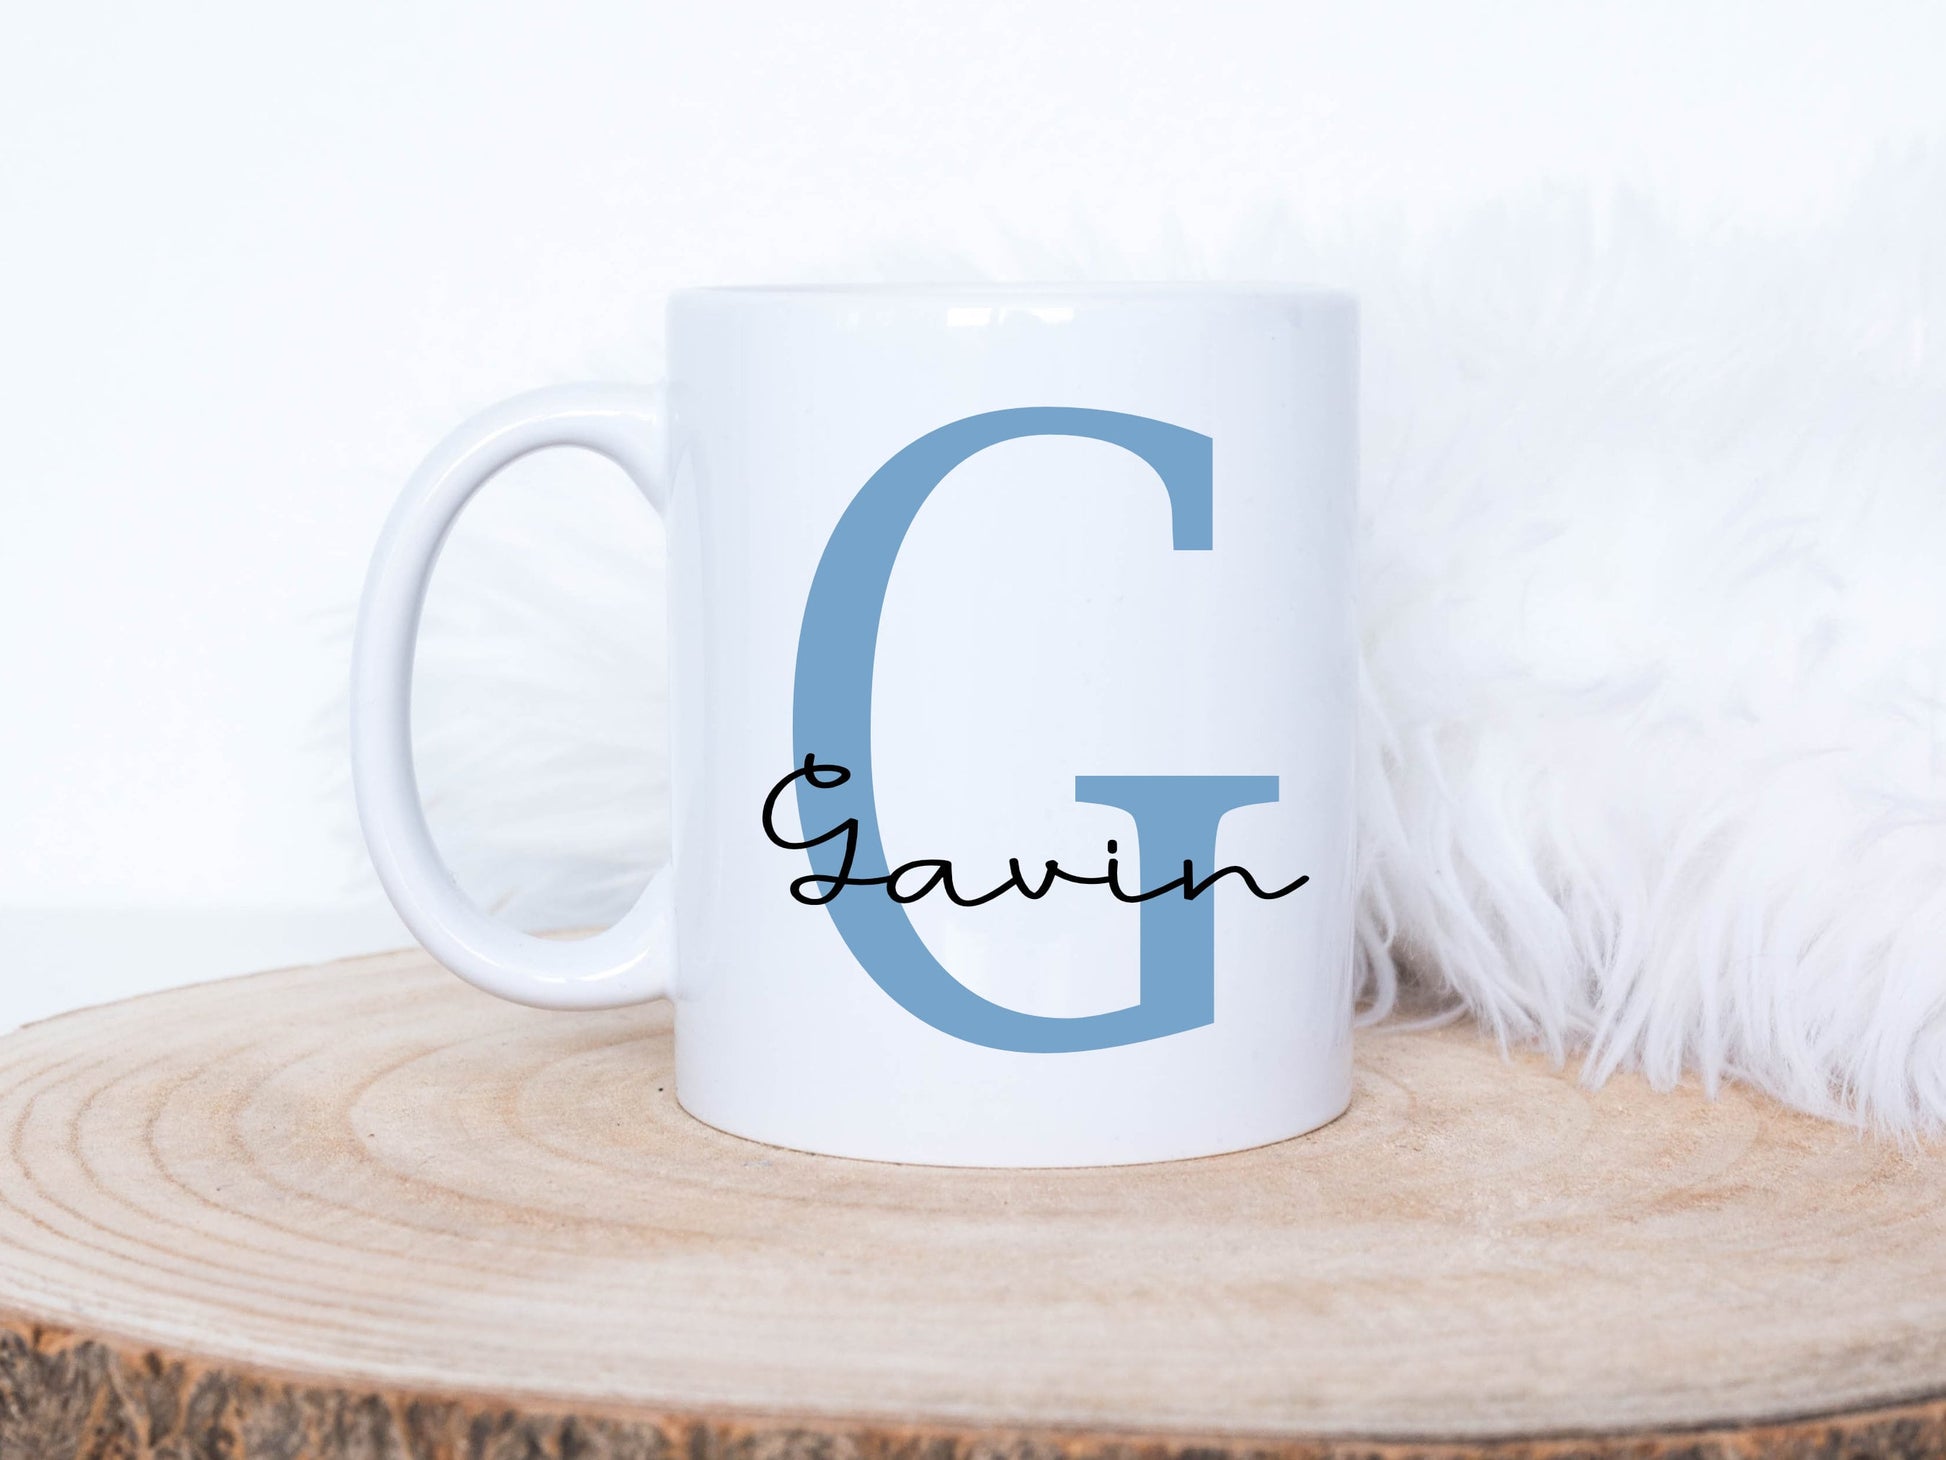 white mug on a log slice has a large blue letter G printed on it with the name Gavin printed over in a black script font